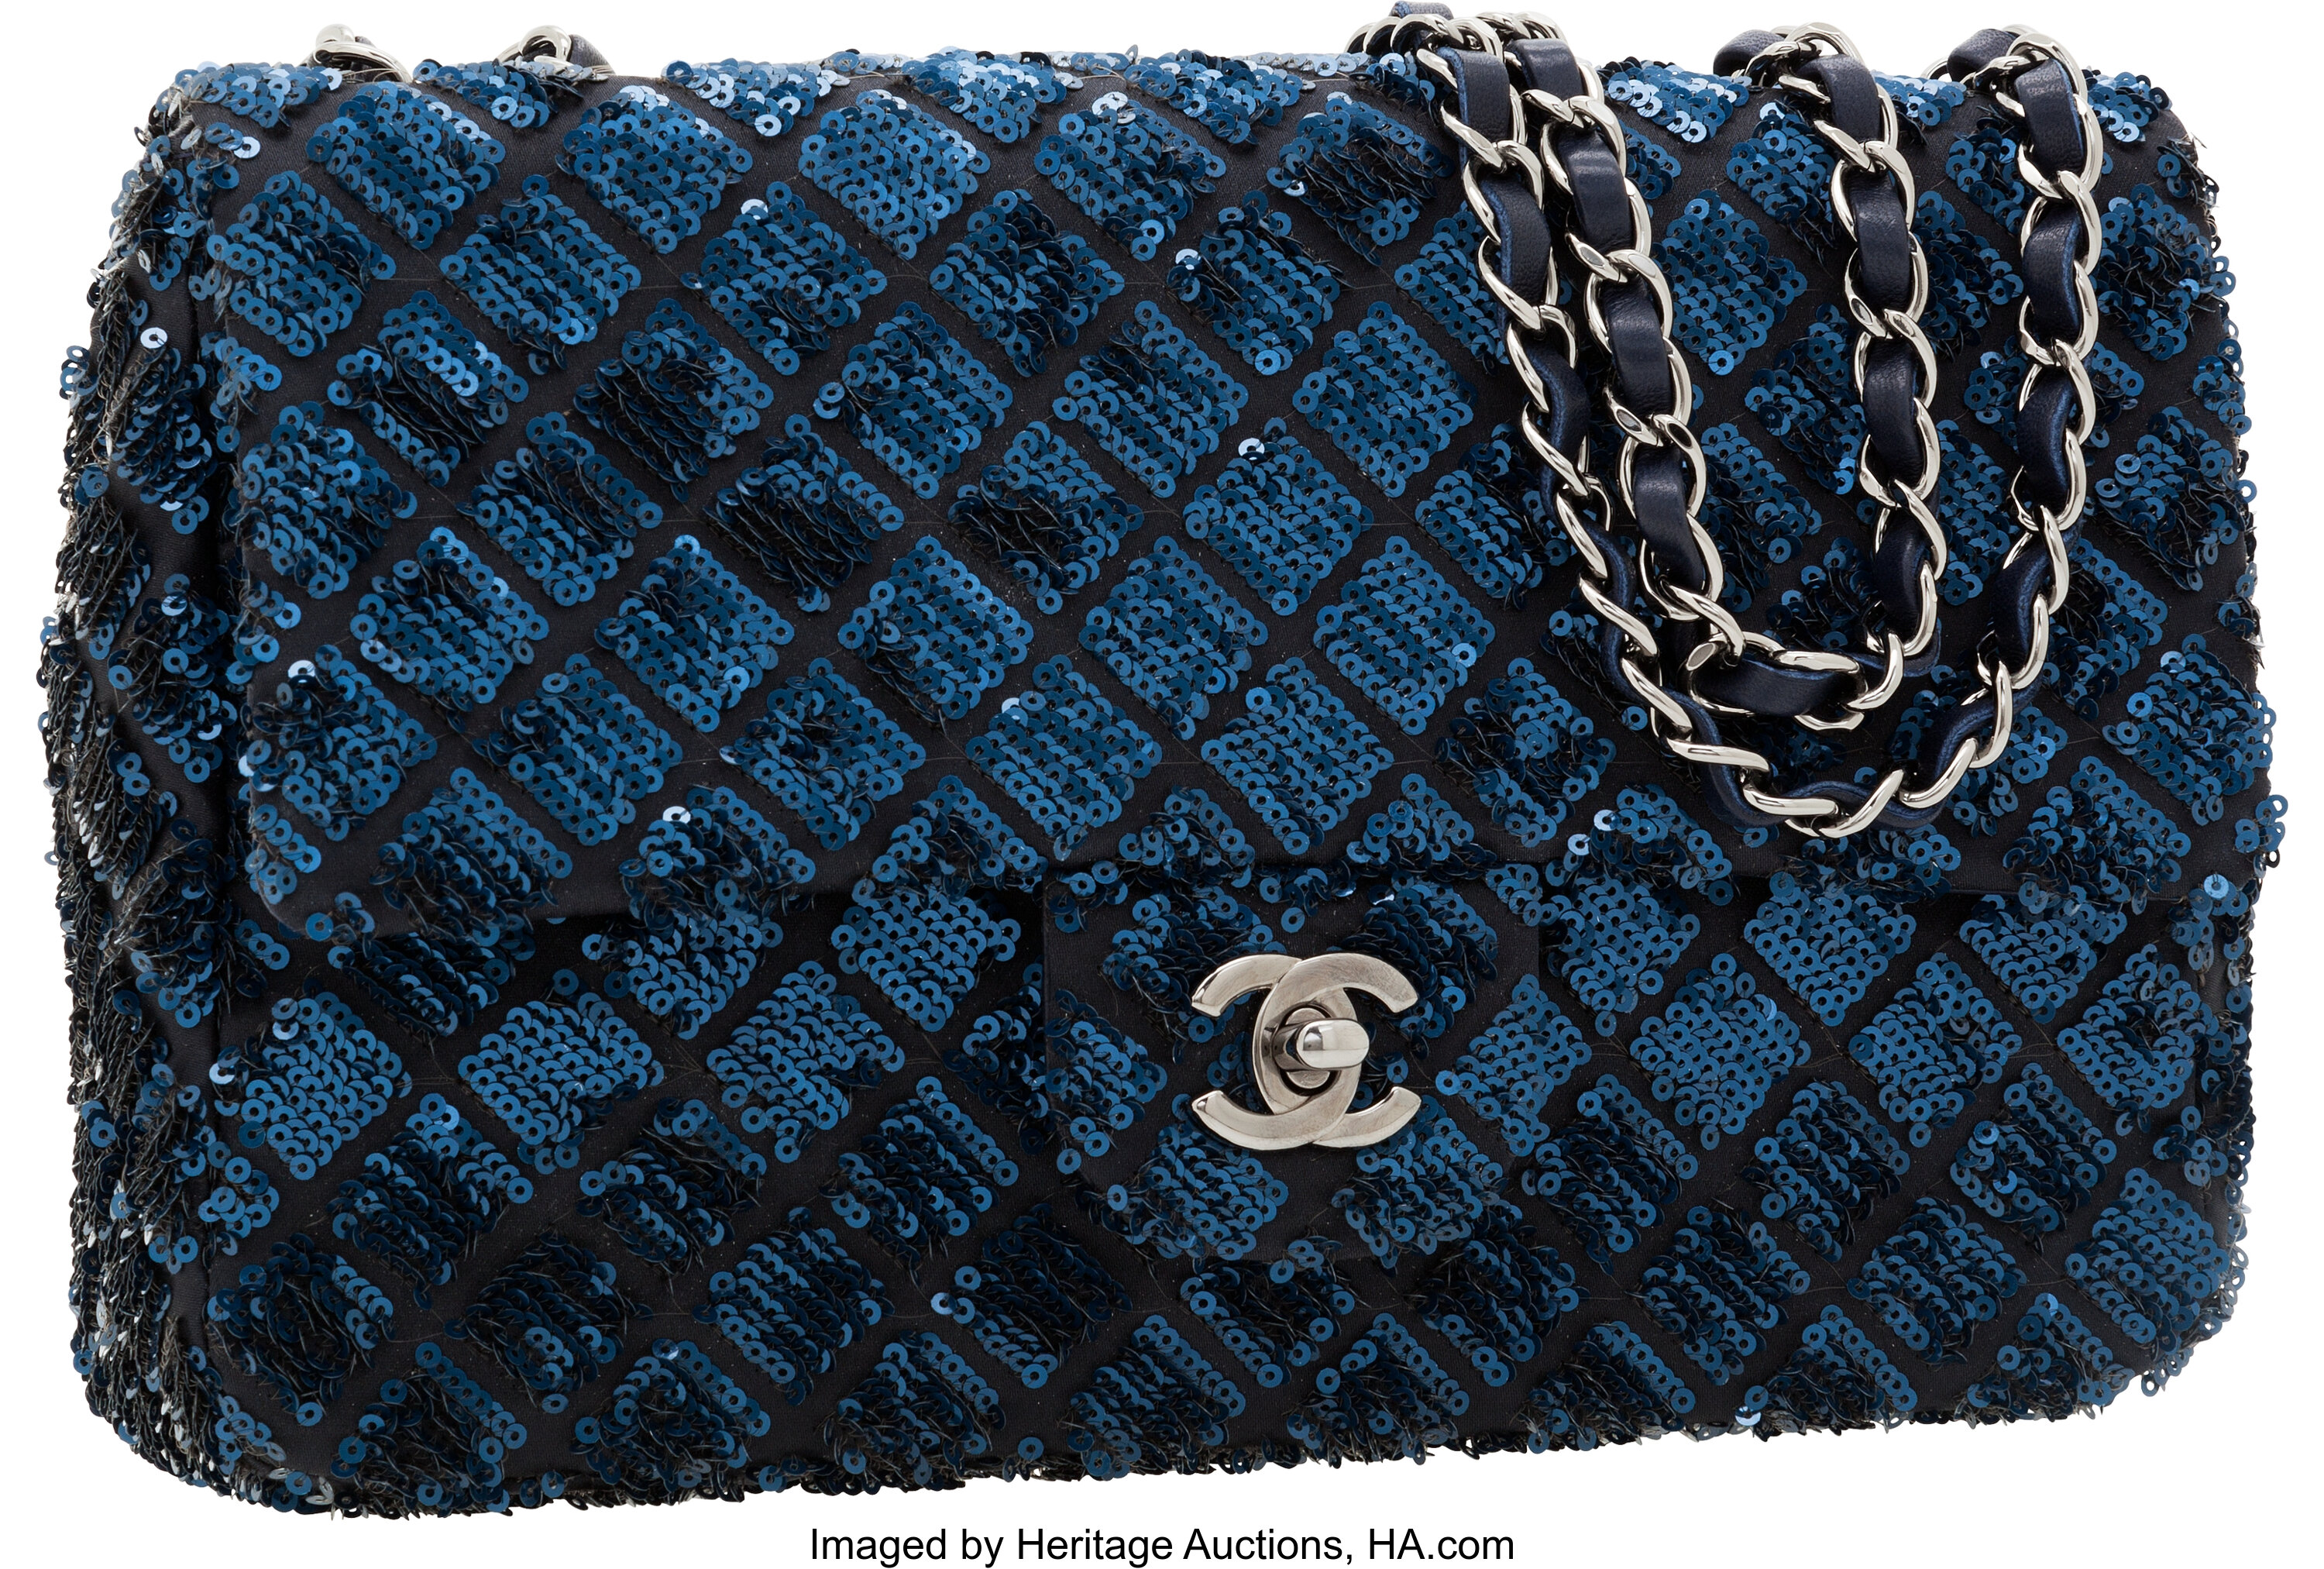 Sold at Auction: Chanel Classic Single Flap Medium Blue Sequin Bag